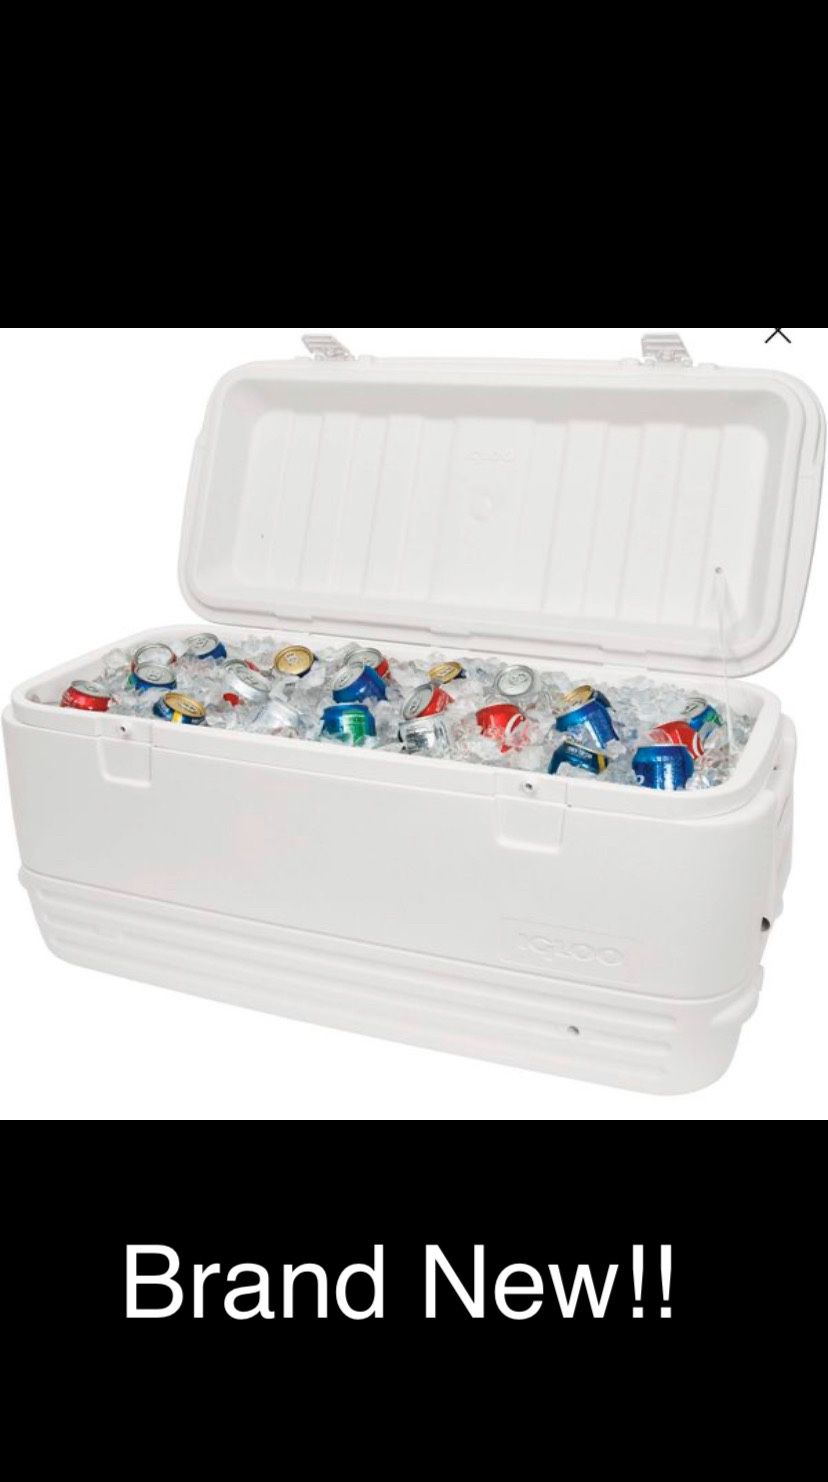 Heavy Duty Cooler Ice Chest Beach Camping Tailgate BBQ